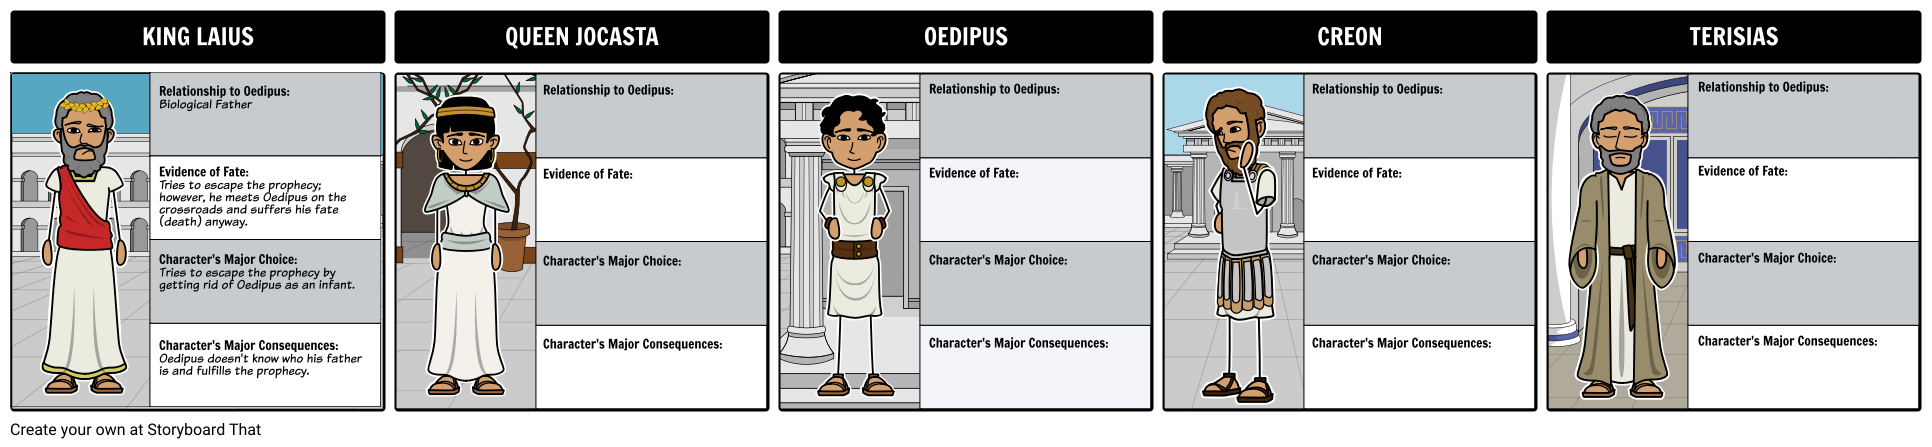 Character Analysis Oedipus the King